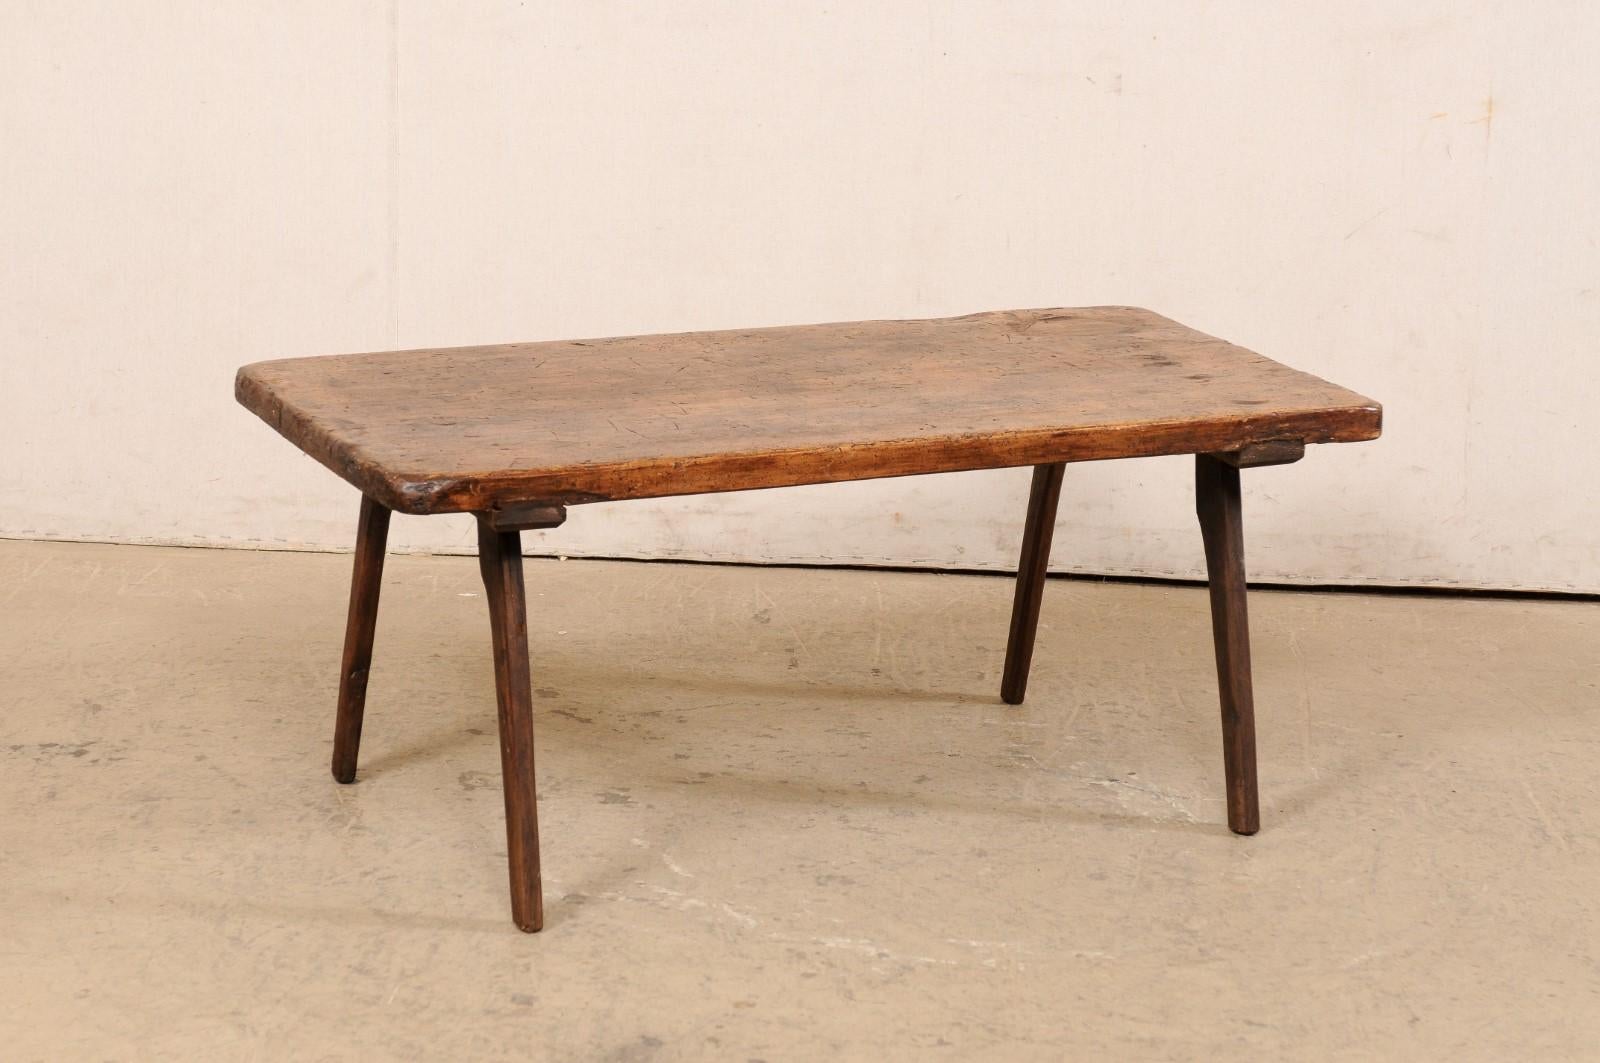 A Spanish single-board top wooden coffee table from the 19th century. This antique table from Spain features a single board wood top, rectangular in shape with smoothed edges. It is raised on four legs which cant in outwardly fashion. The wood has a